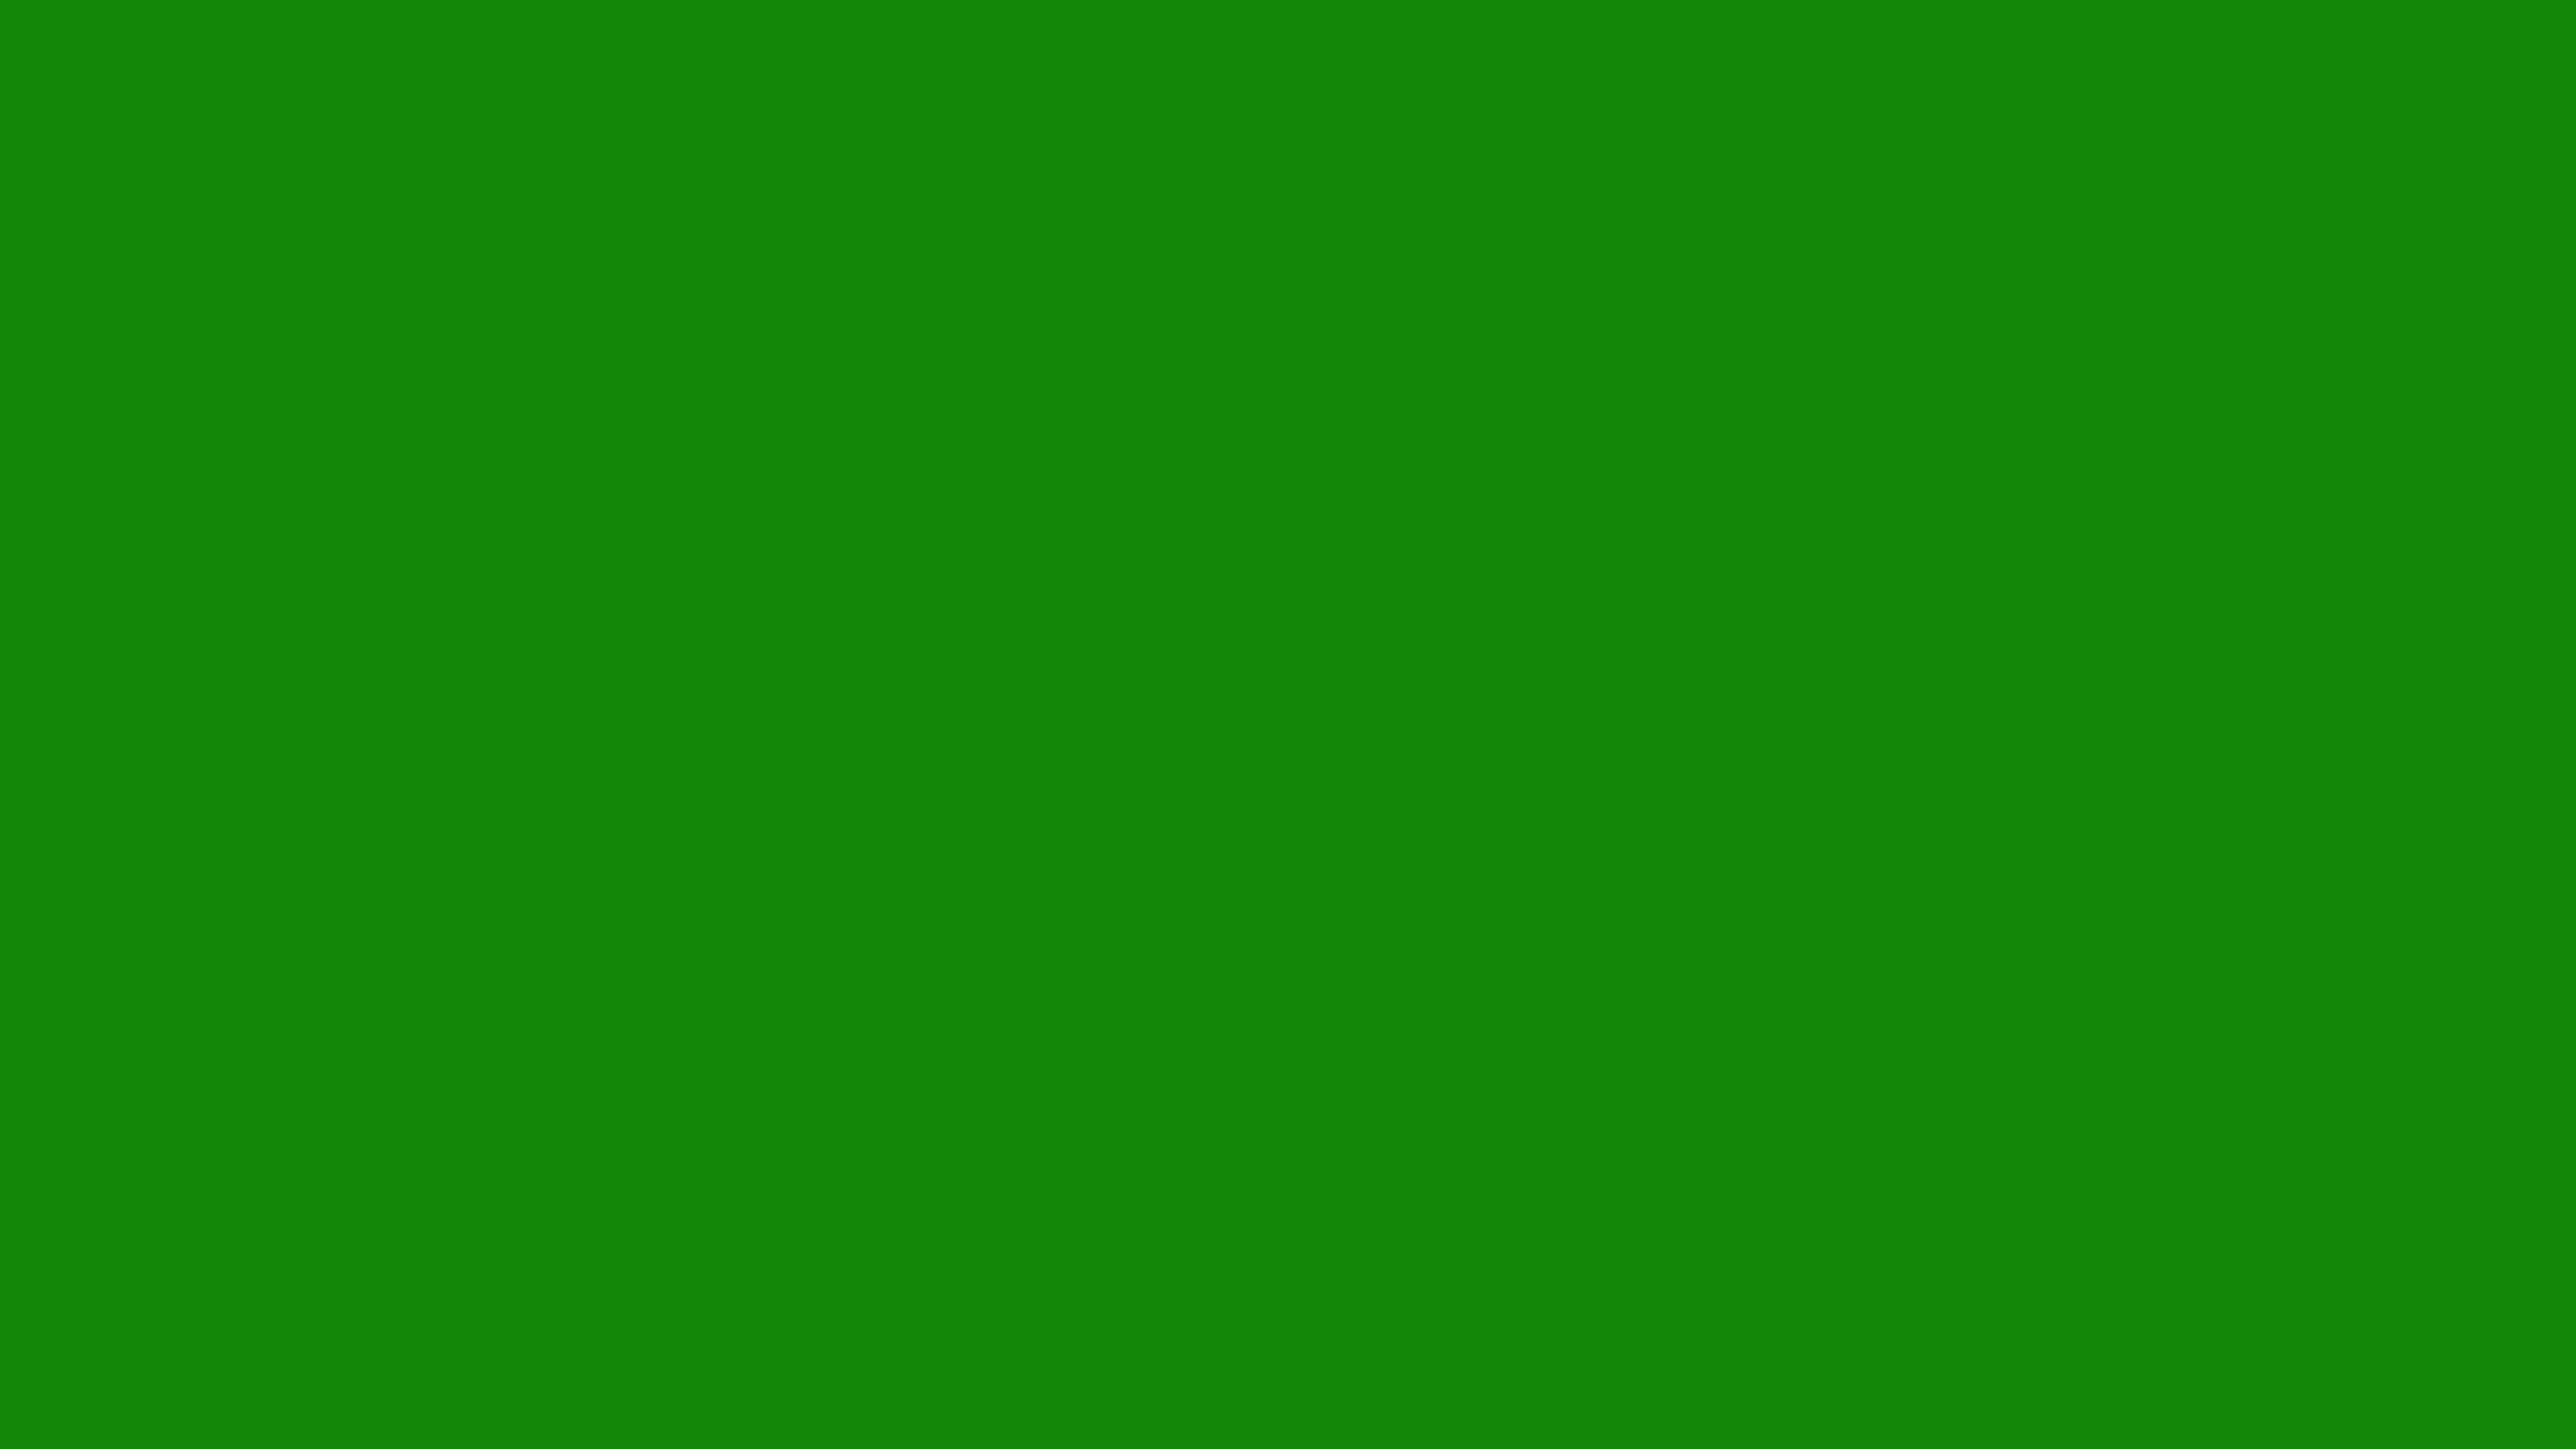 7680x4320 India Green Solid Color Background